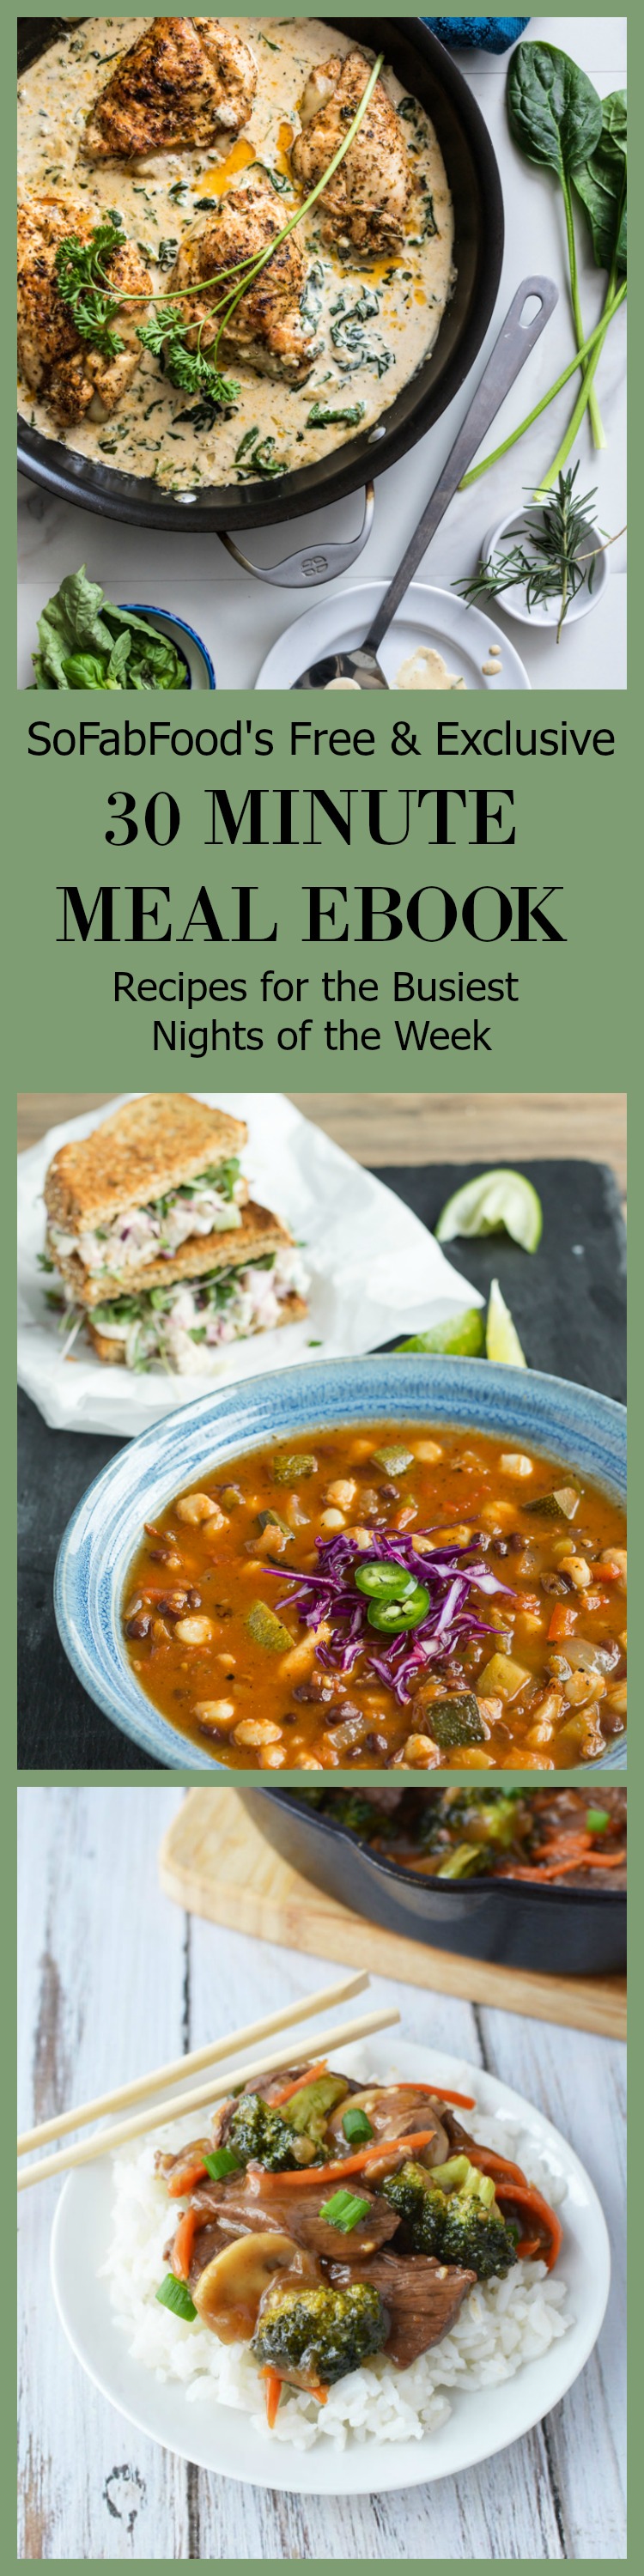 Take the stress out of weeknight meal preparation with this 30-Minute Meal Exclusive eBook now available to you. Whether you crave chicken, fish, or a deli-style meal, cook to impress with these quick and simple recipes!